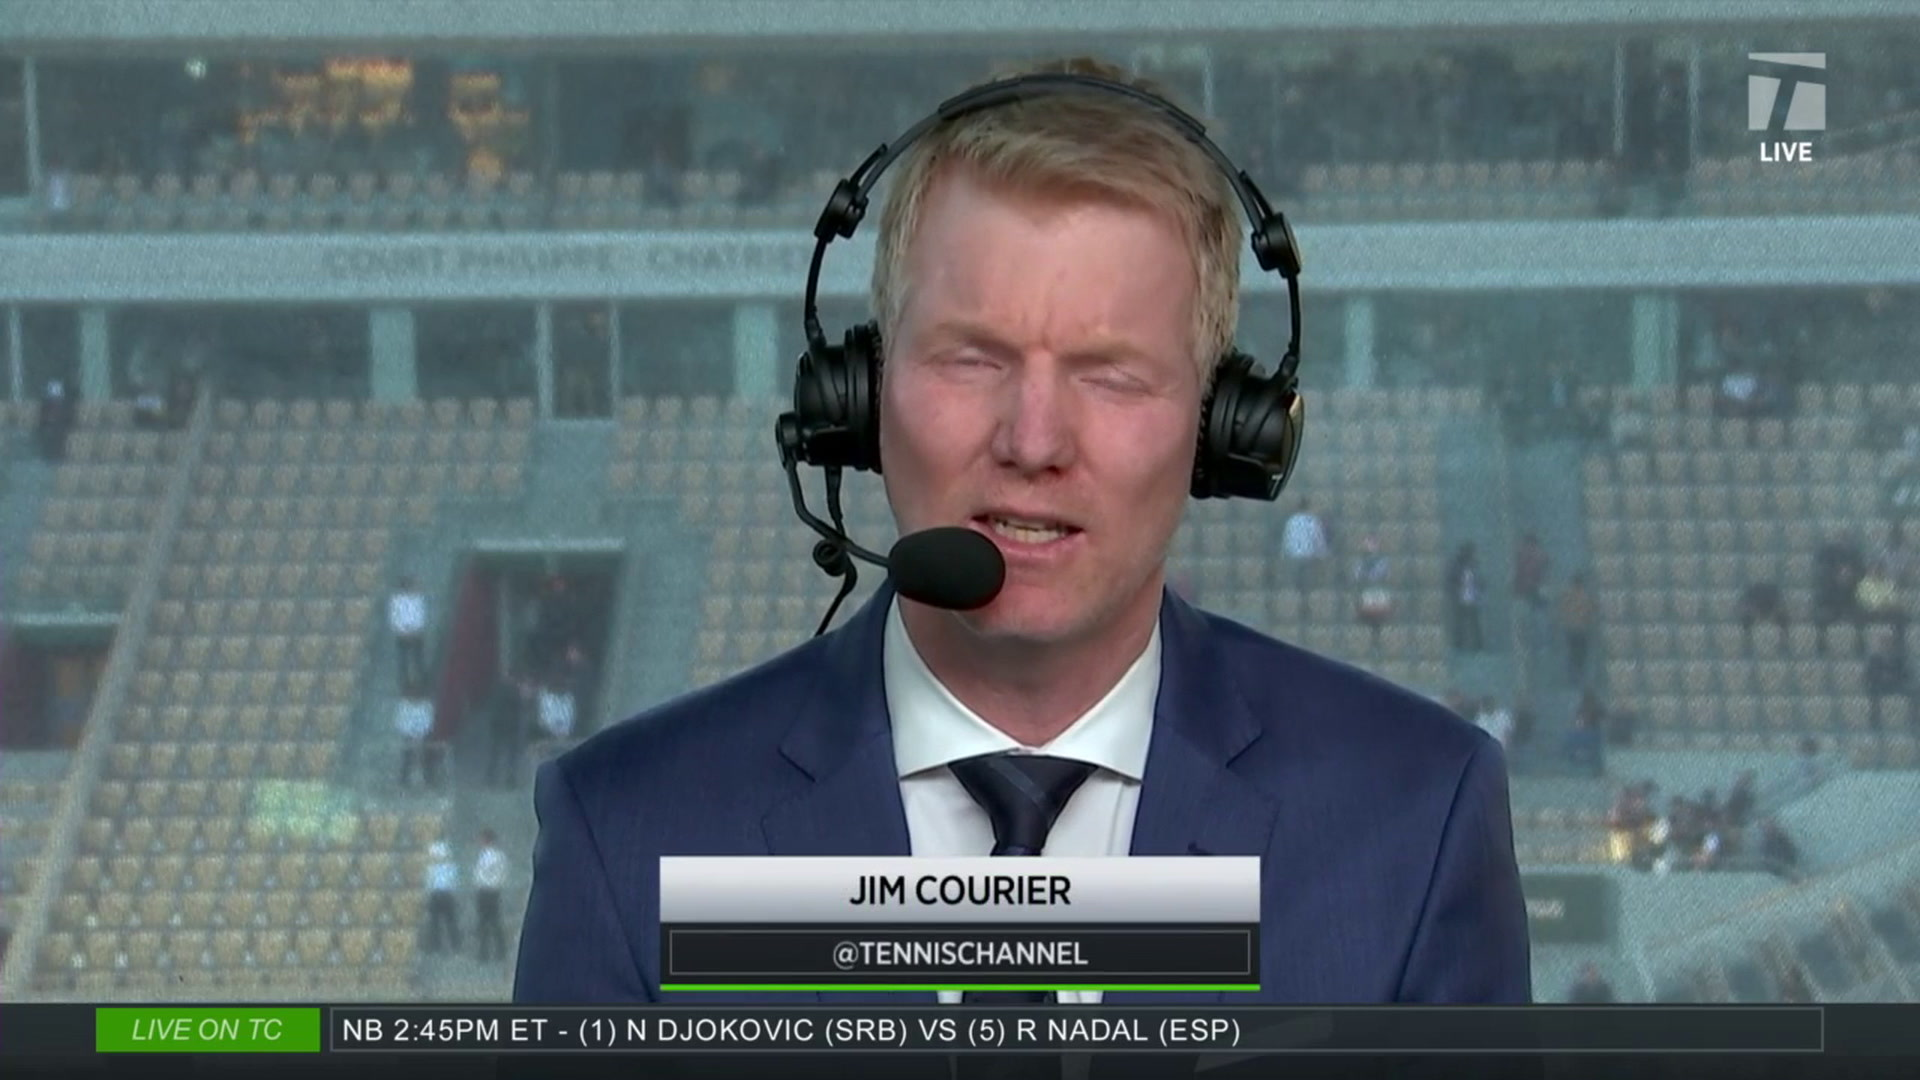 Tennis Channel Live: Jim Courier weighs in on Nadal vs. Djokovic ...